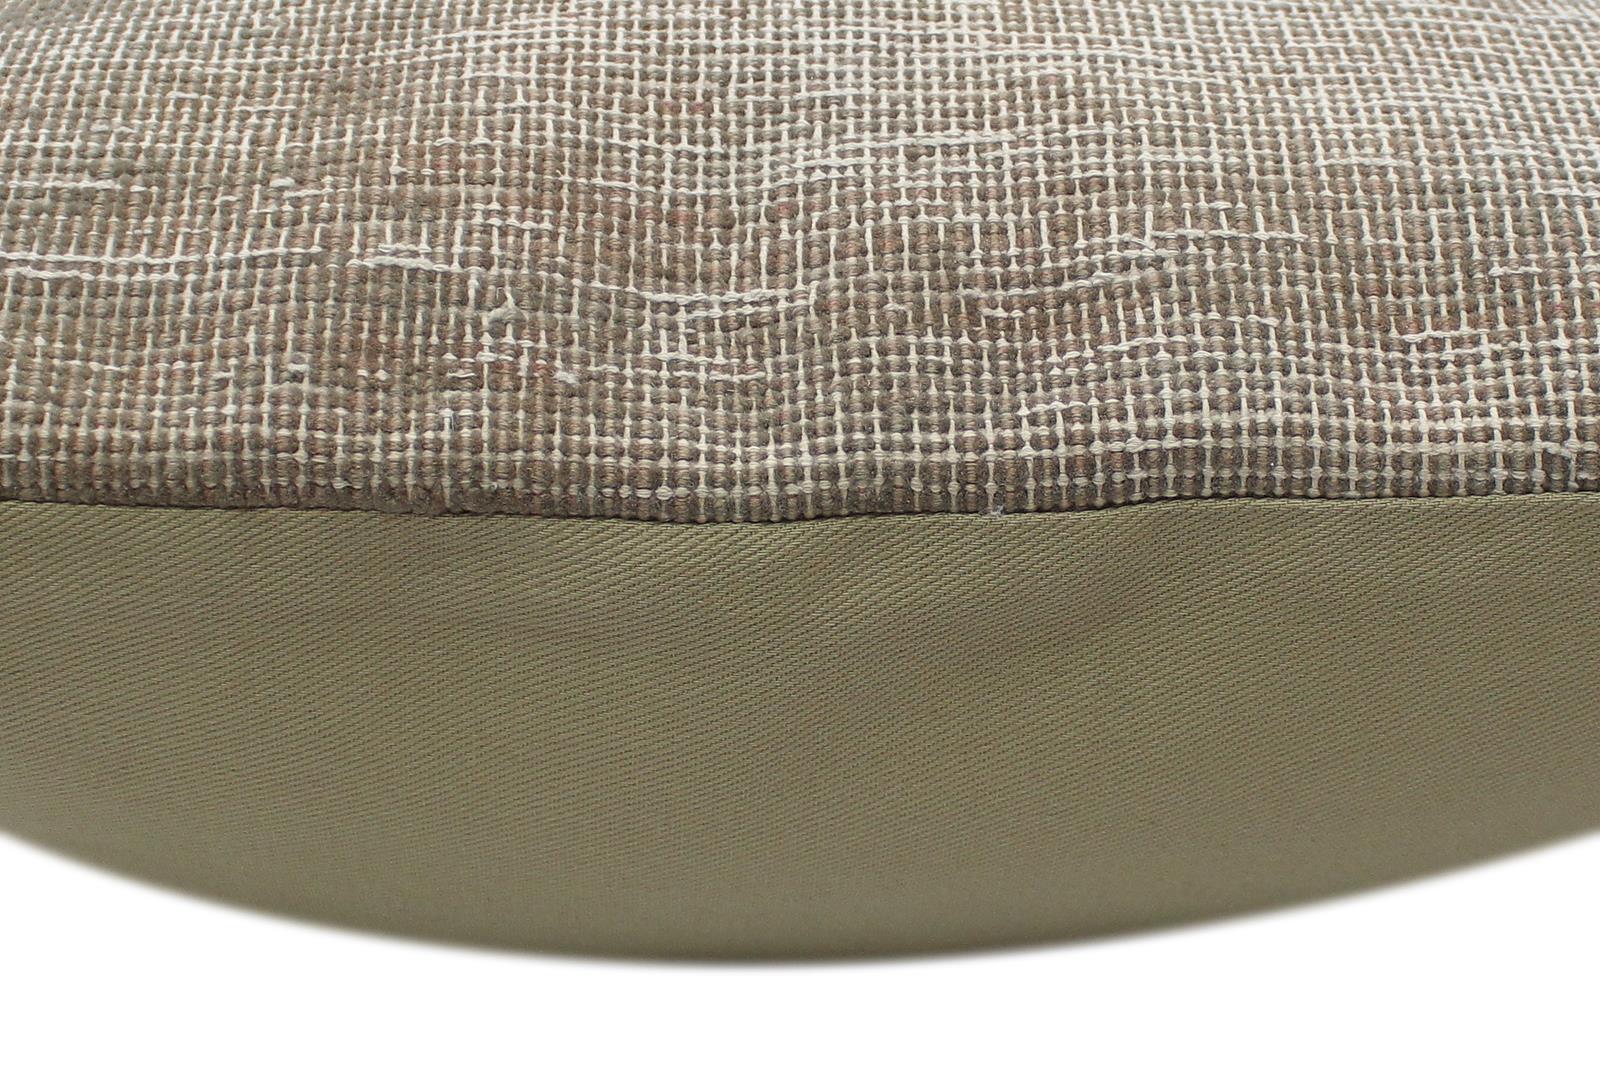 handmade Vintage Pillow Gray Brown Hand-Woven SQUARE 100% WOOL Vintage Pillow